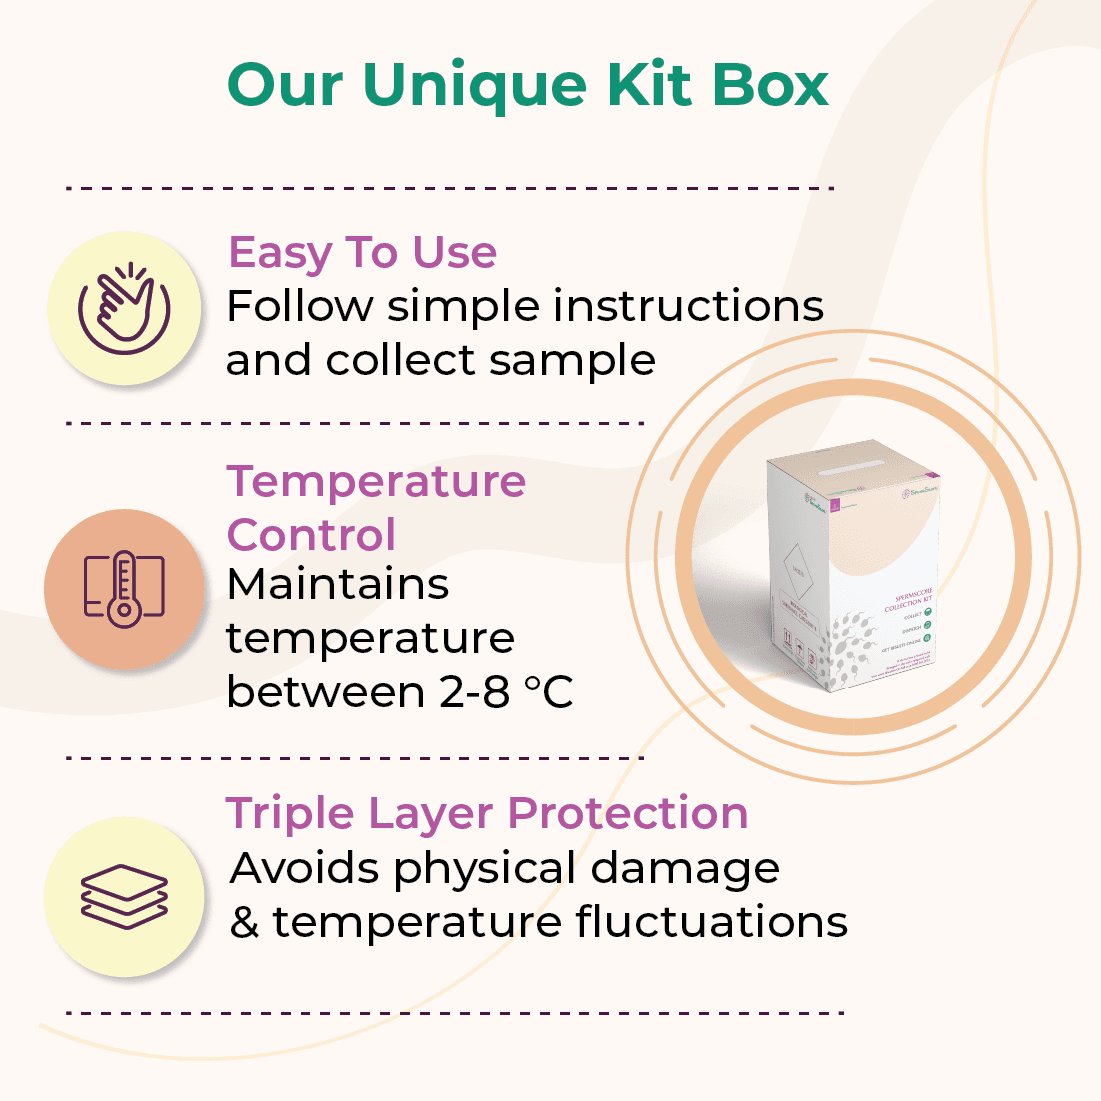 Features Of The Spermvault Kit